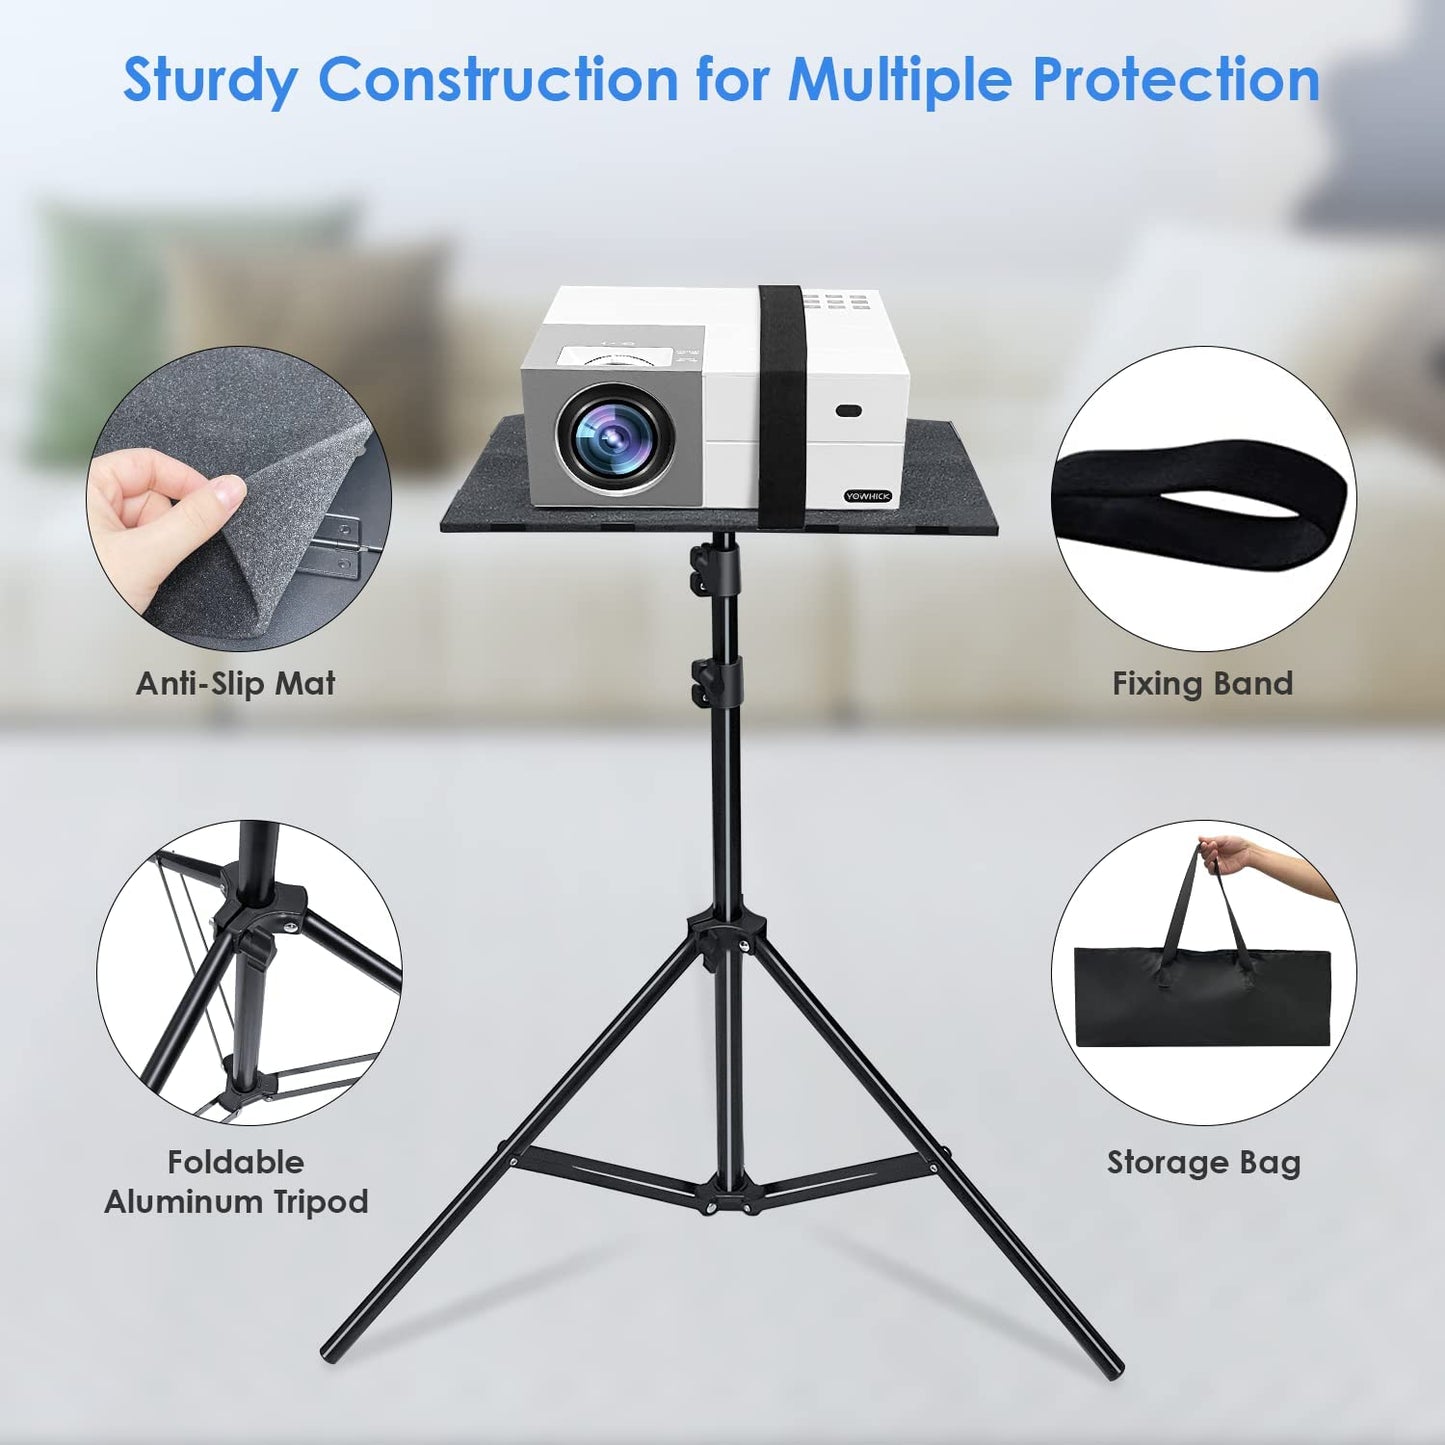 YOWHICK Projector Tripod Stand for 23" to 61", Foldable Laptop Tripod, Multifunctional DJ Racks/Projector Stand with Adjustable Height, Perfect for Office, Home, Stage or Studio - YOWHICK